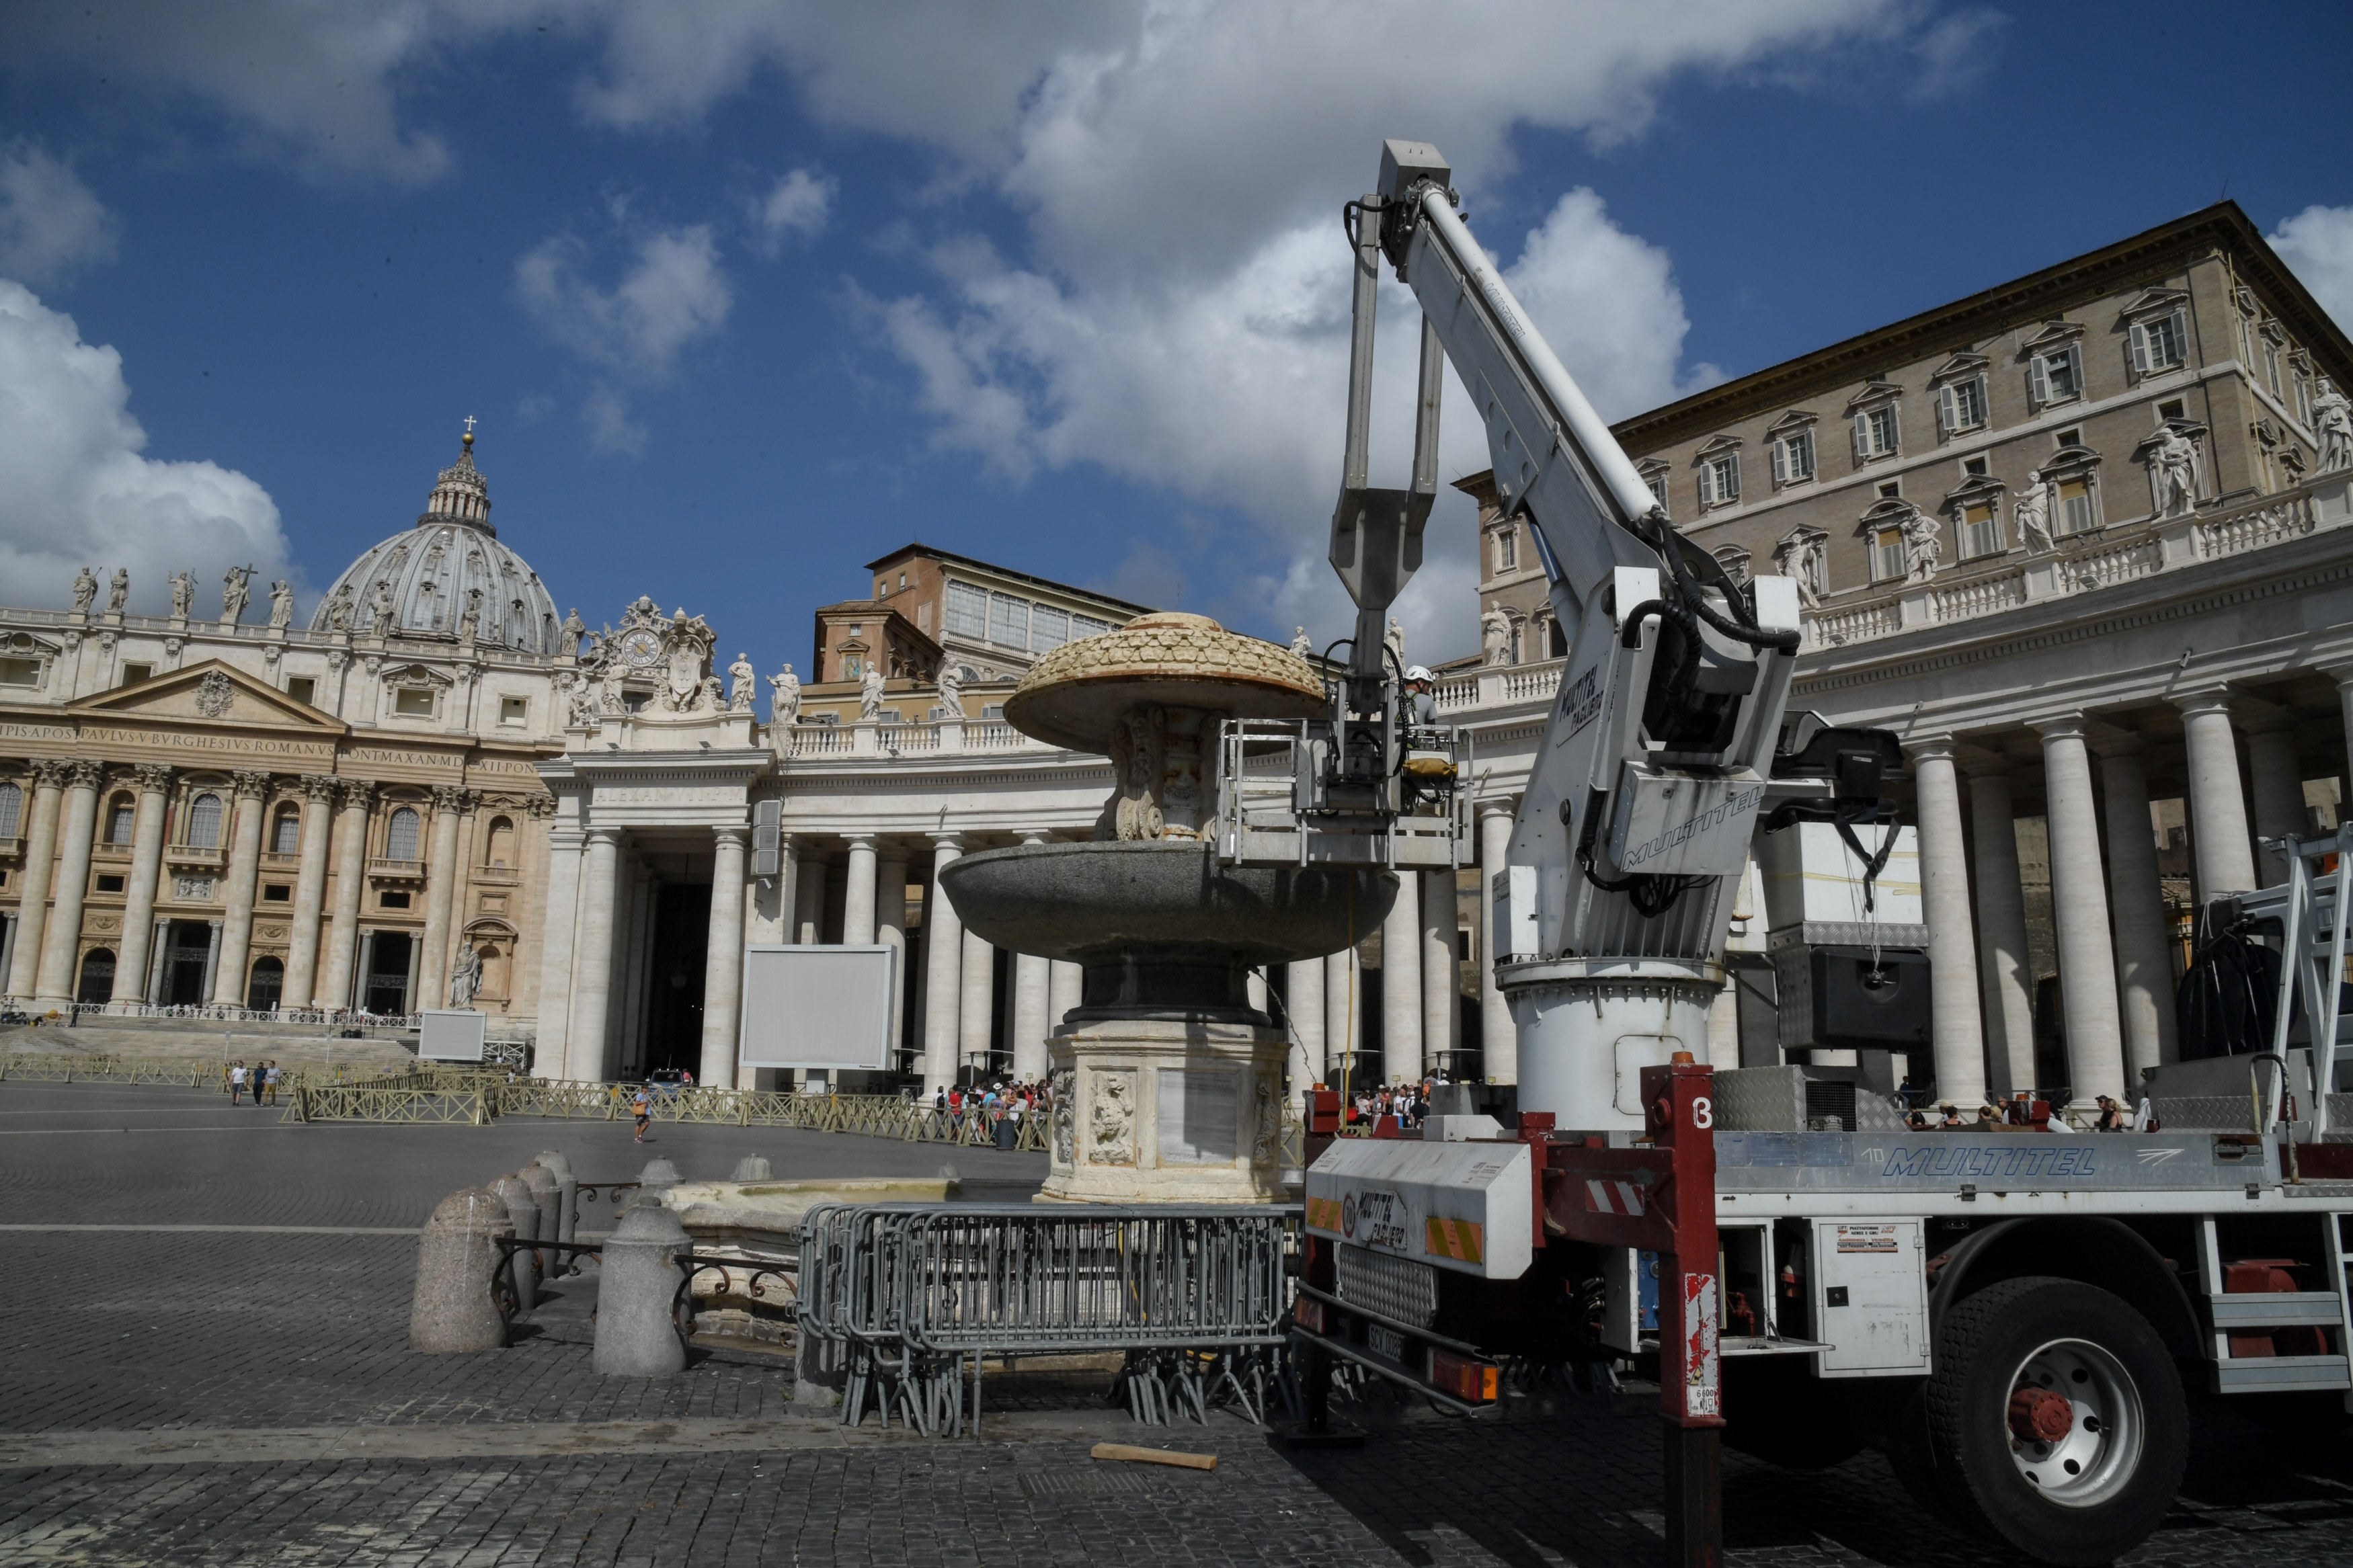 A mobile crane is seen parked at a dry fountain in St Peter's Square, in Vatican city, after the Vatican authorities decision to turn off some of the fountains due to a drought affecting Rome, on July 25, 2017. (Andreas Solaro—AFP/Getty Images)